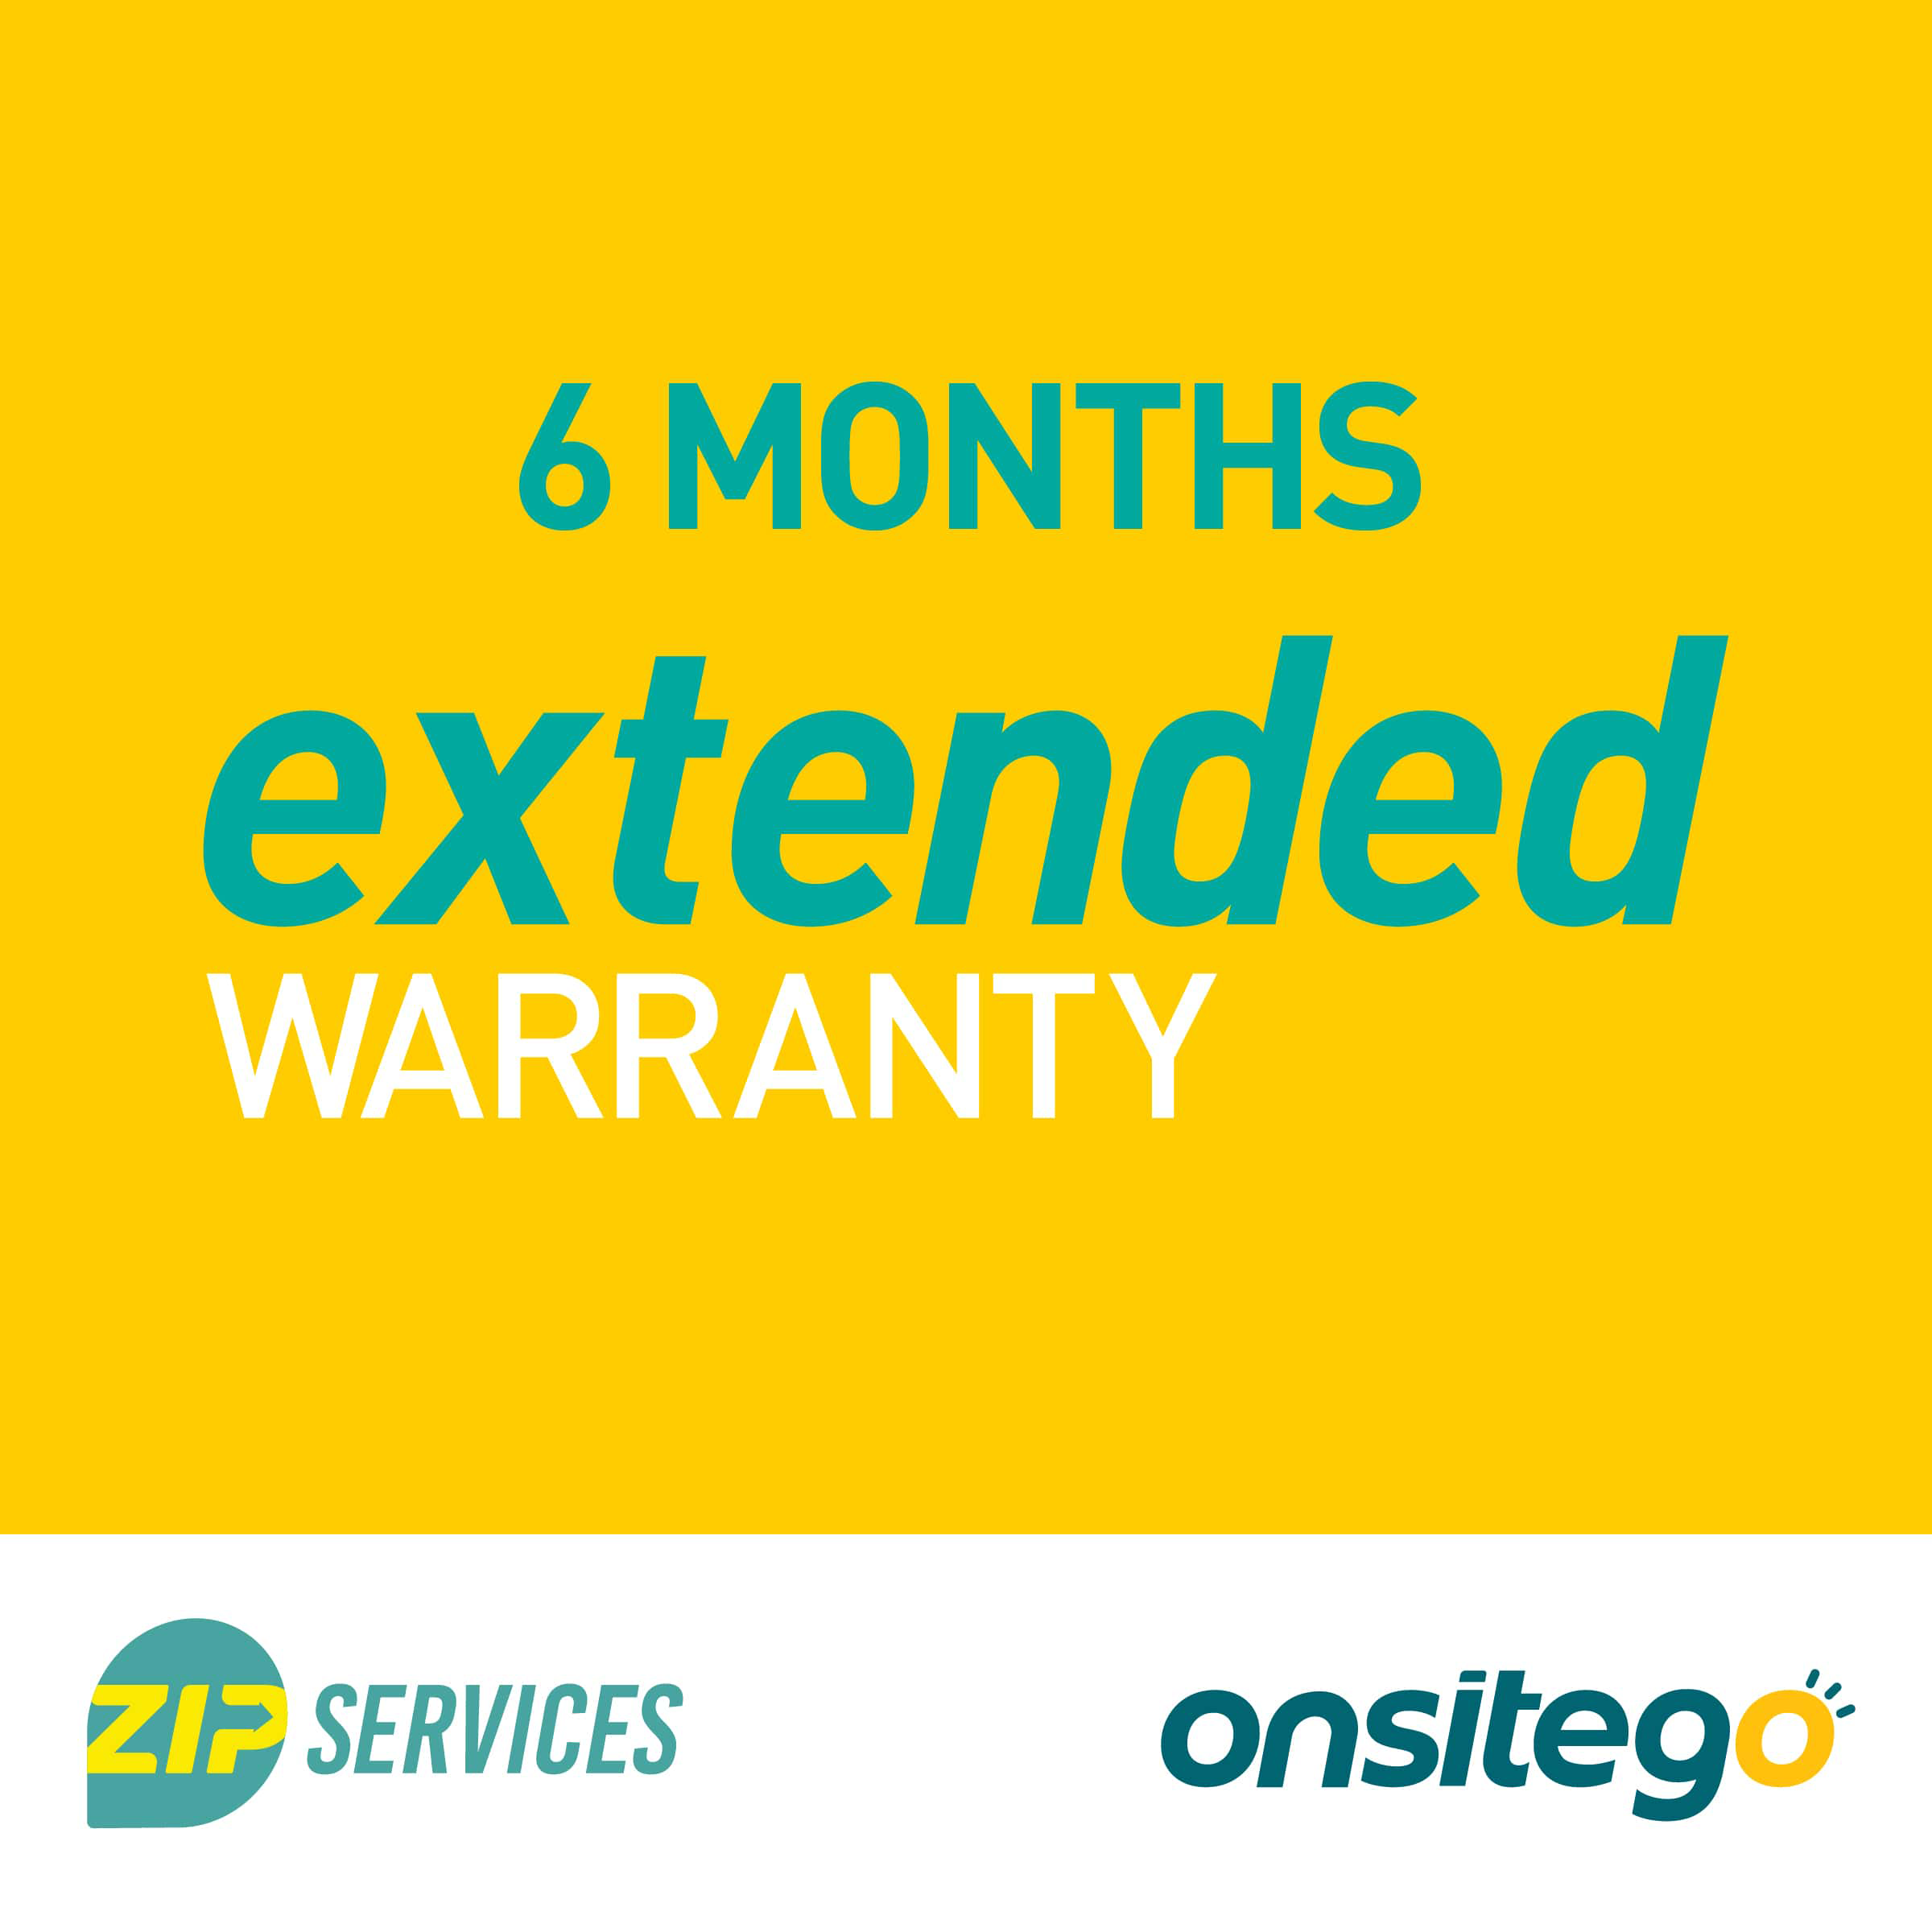 OnsiteGo 6 Months Extended Warranty for PC Accessory  Rs.1001 - Rs.1500_1